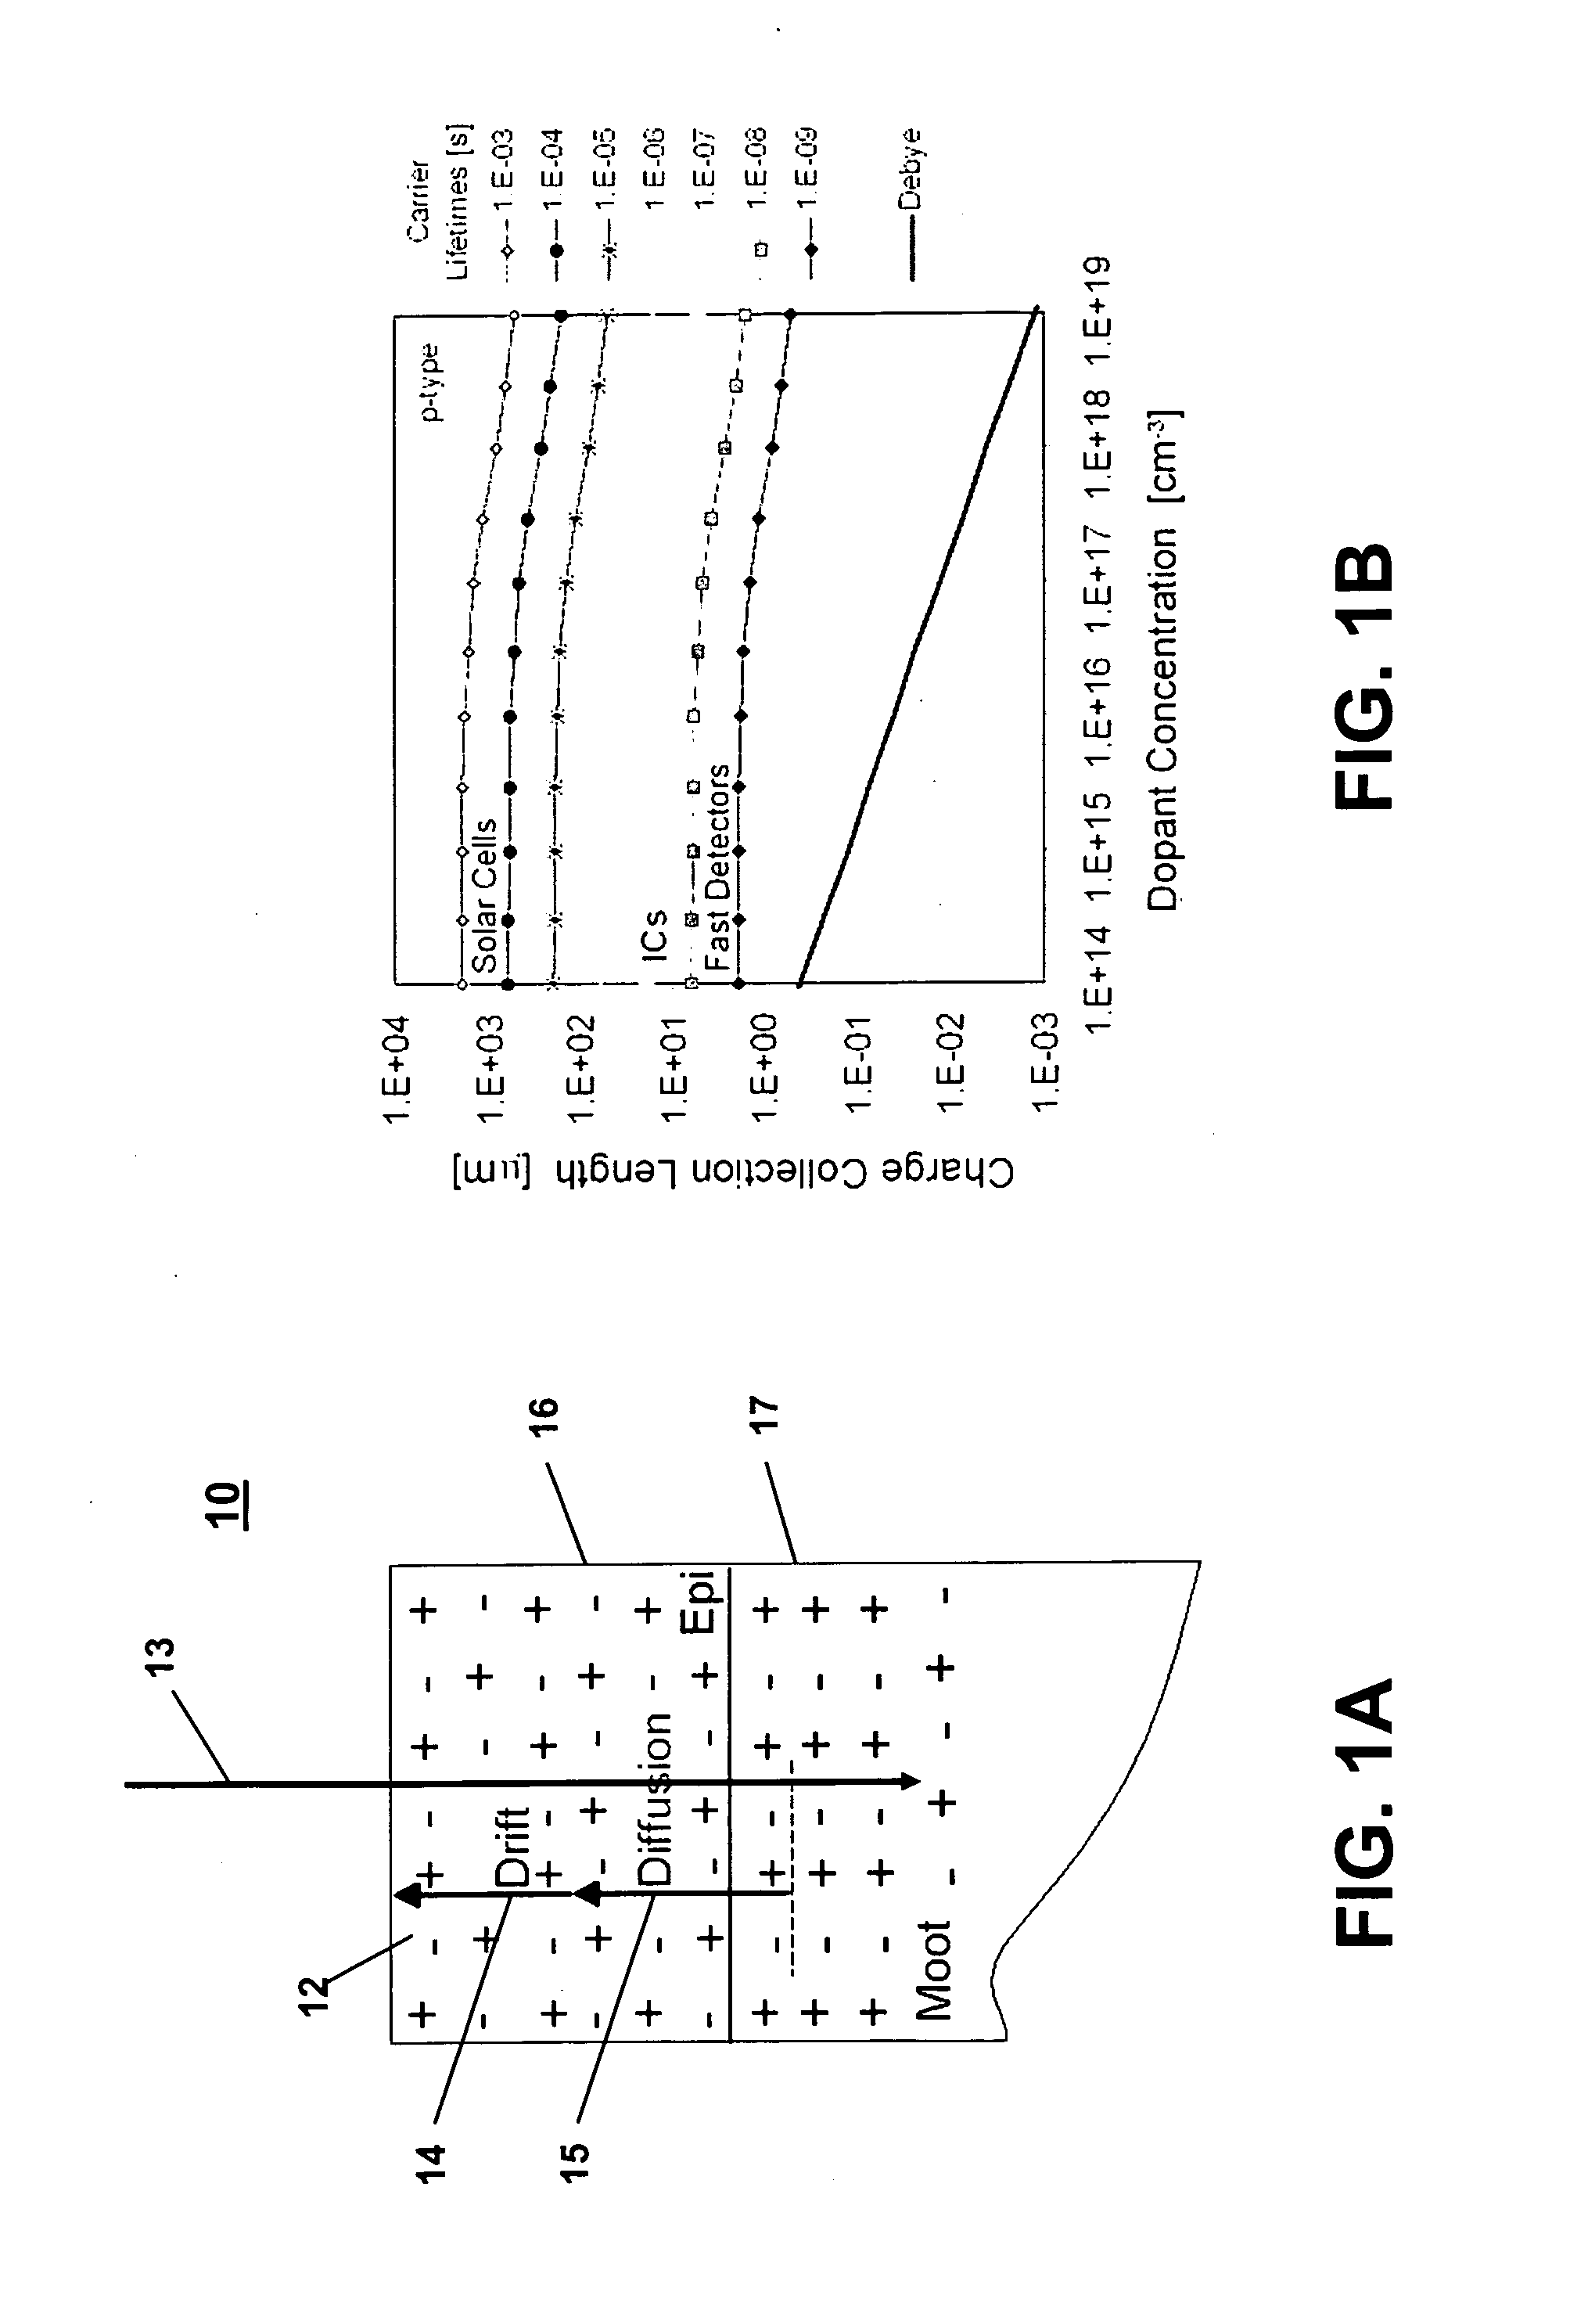 Laser-based irradiation apparatus and method to measure the functional dose-rate response of semiconductor devices